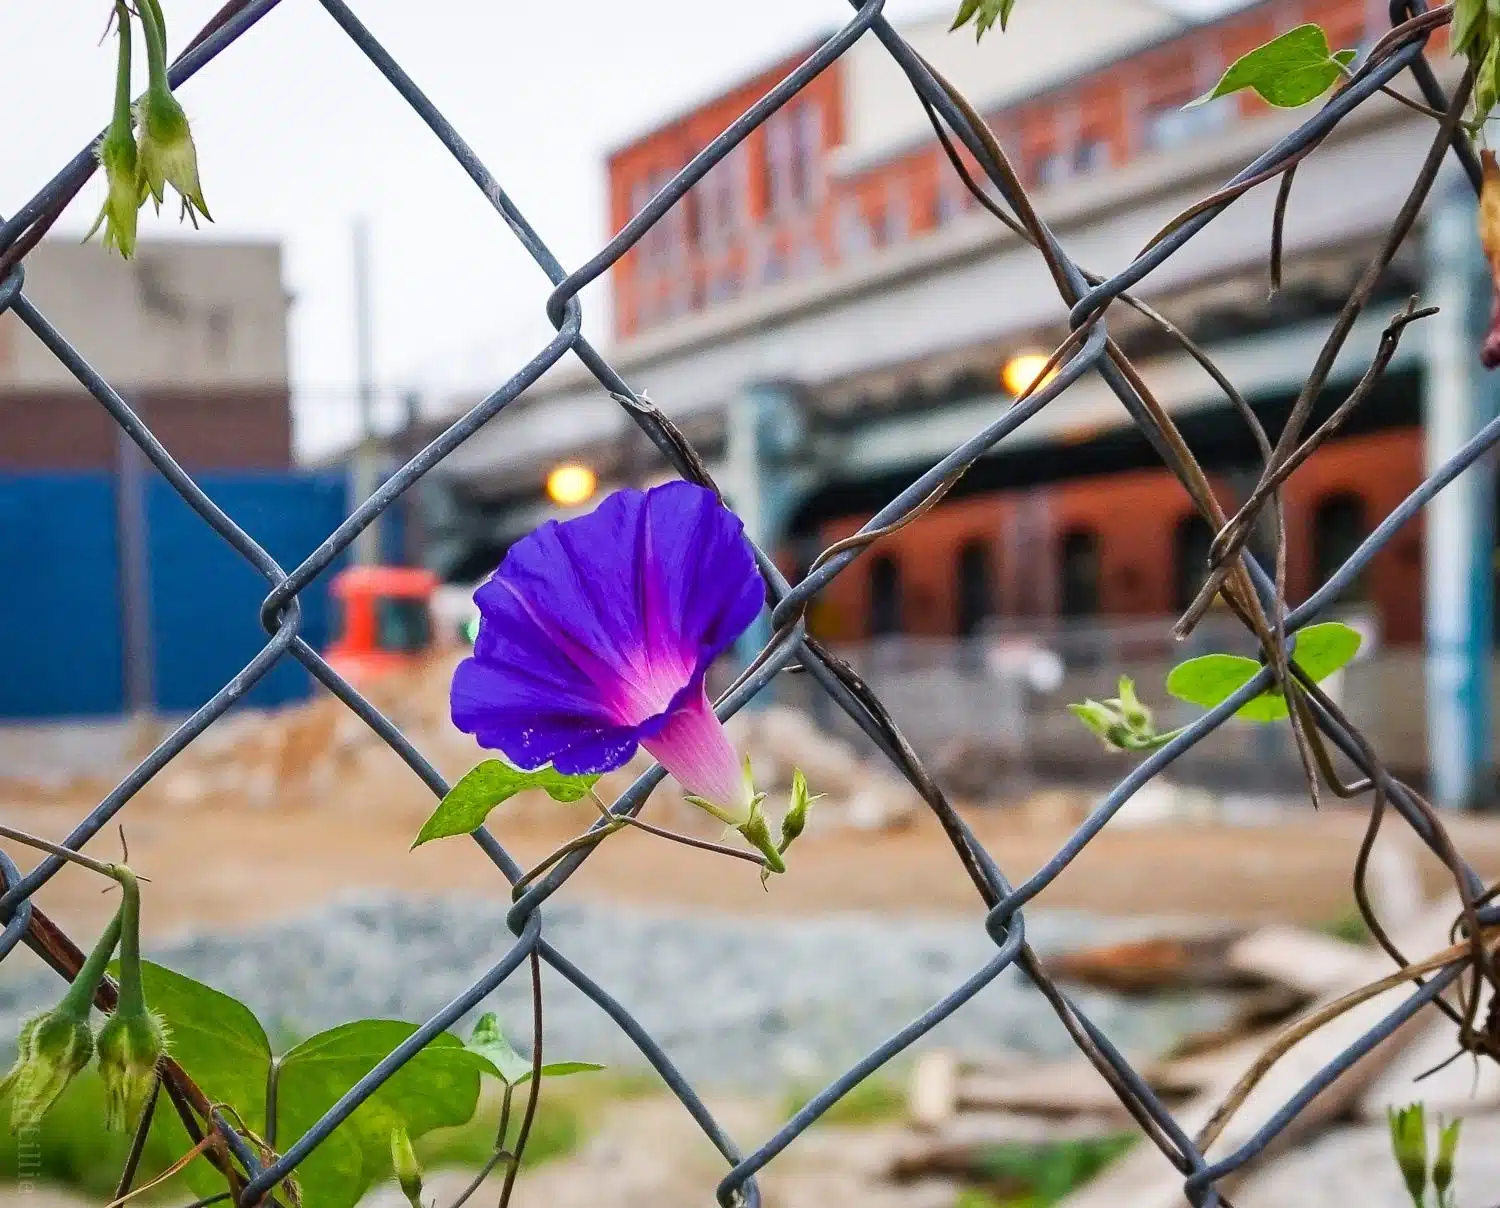 Morning Glory flowers popped up all over town.